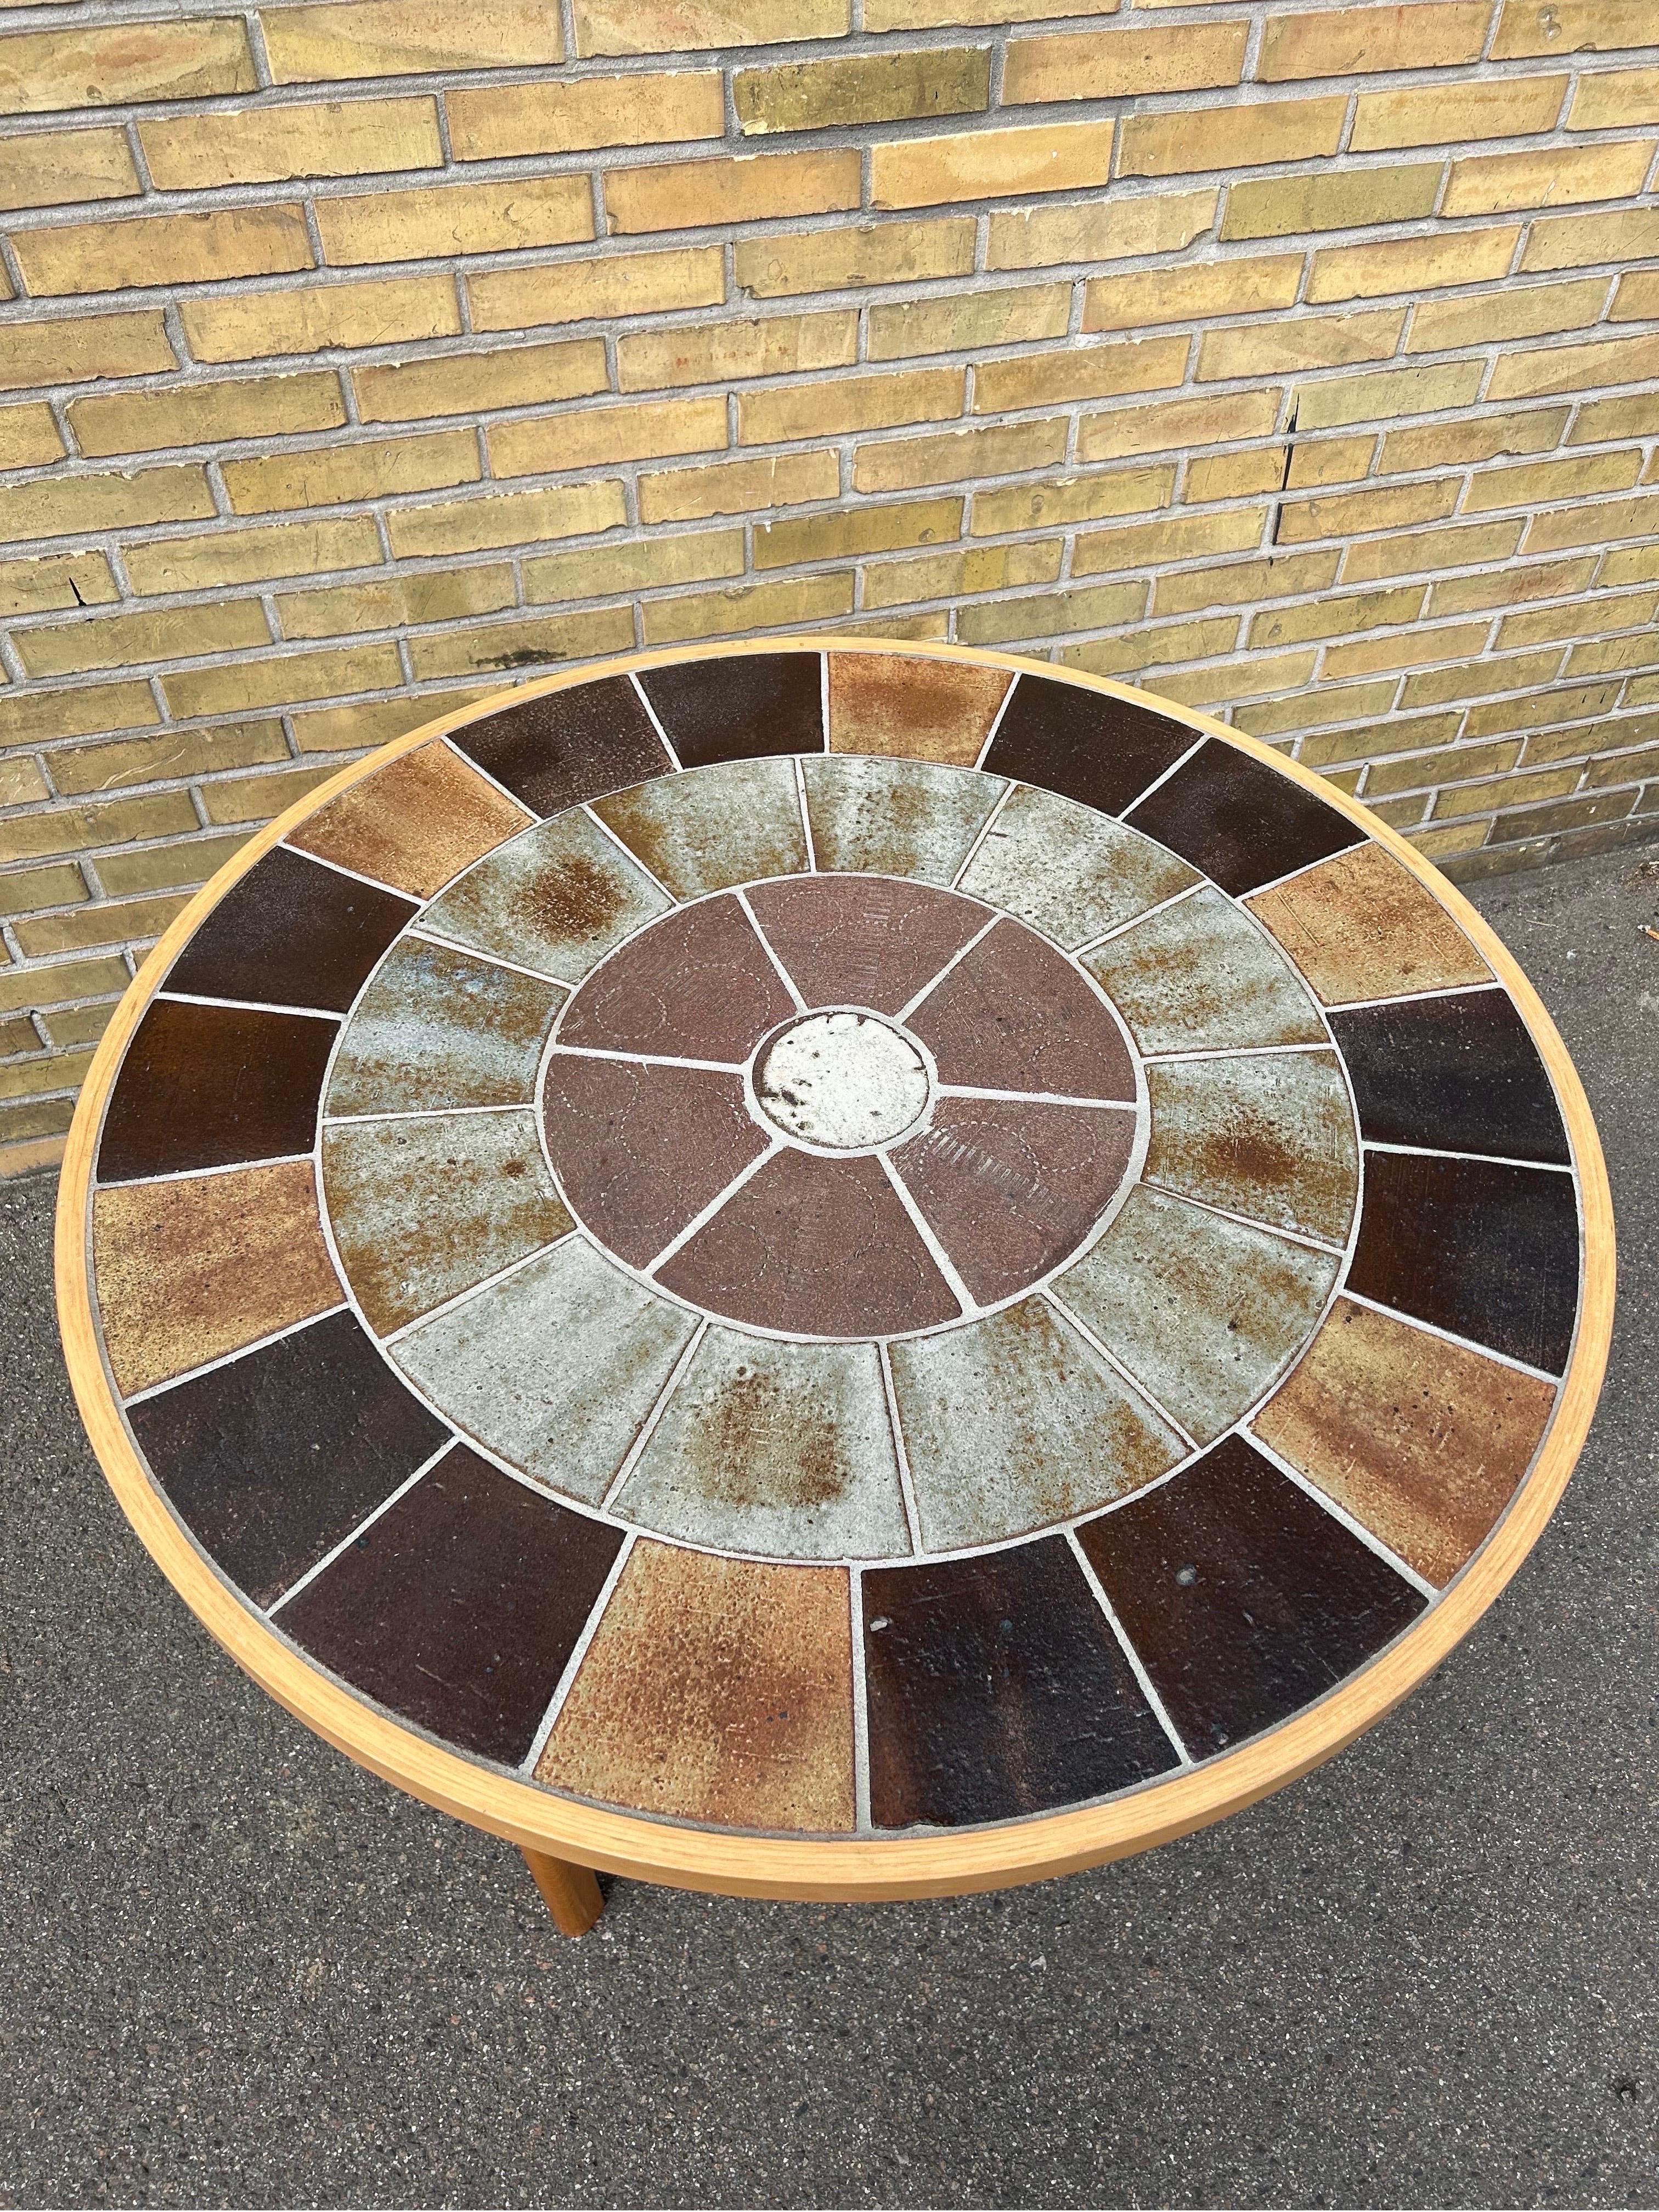 Rare tile top dining table by Danish artist Tue Poulsen in solid lacquered beech wood and glazed ceramic tiles made in Denmark in the 1960’s.

The table is in good condition with a beautiful patina, all the tiles are in good solid condition with